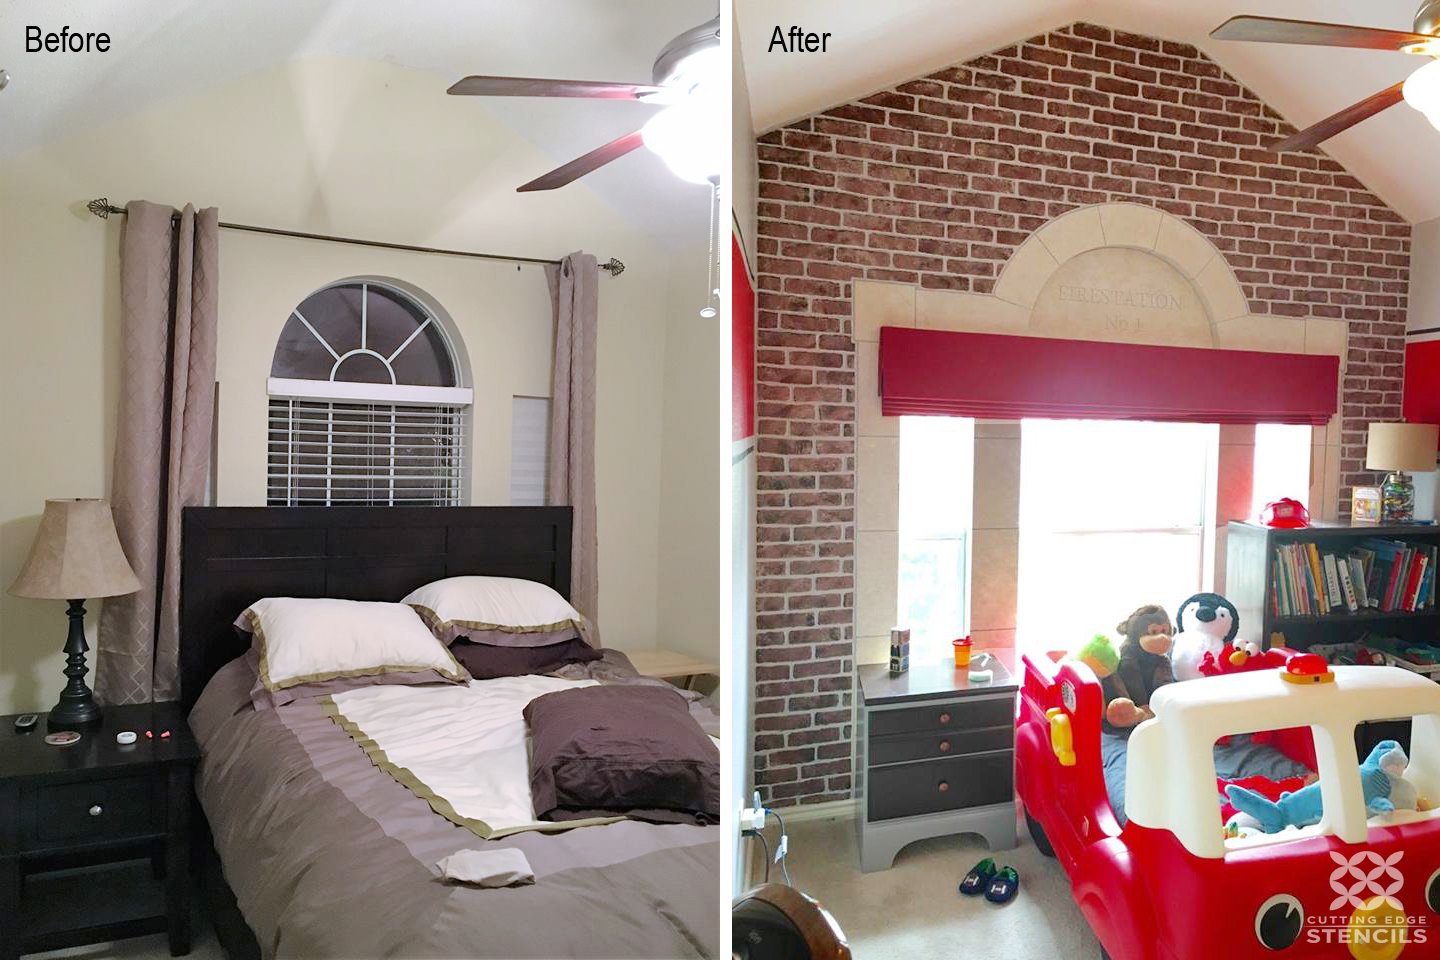 A before and after of a DIY faux brick stenciled accent wall in a bedroom using the Brick Allover Stencil from Cutting Edge Stencils. http://www.cuttingedgestencils.com/bricks-stencil-allover-pattern-stencils.html